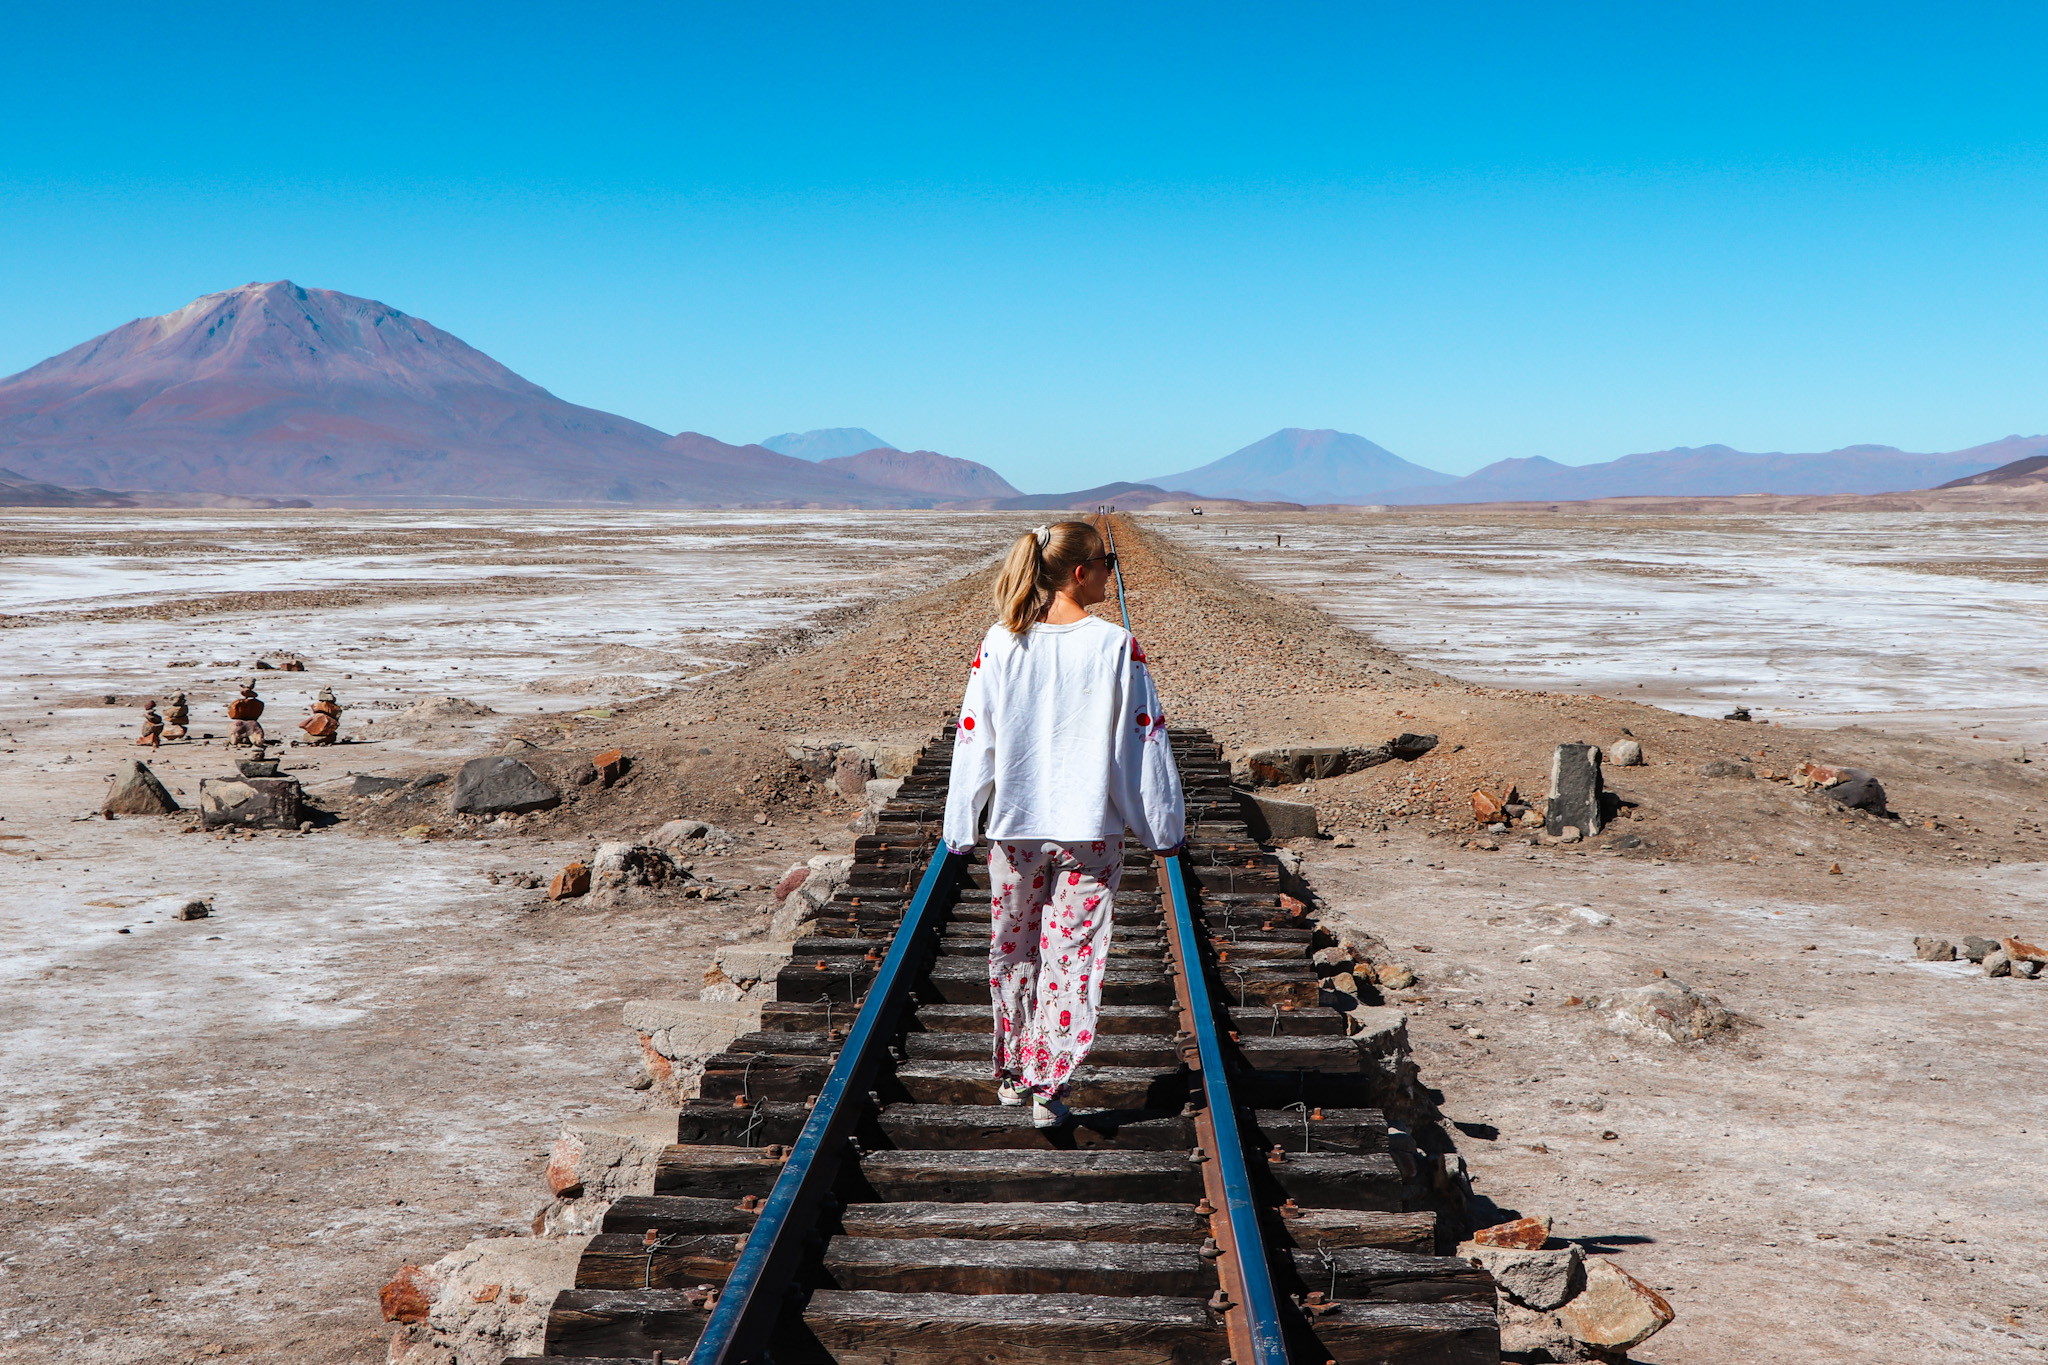 Uyuni Travel Guide: Walking on the train tracks leading to Chile in Salar de Chiguana with volcano Ollagüe in the background